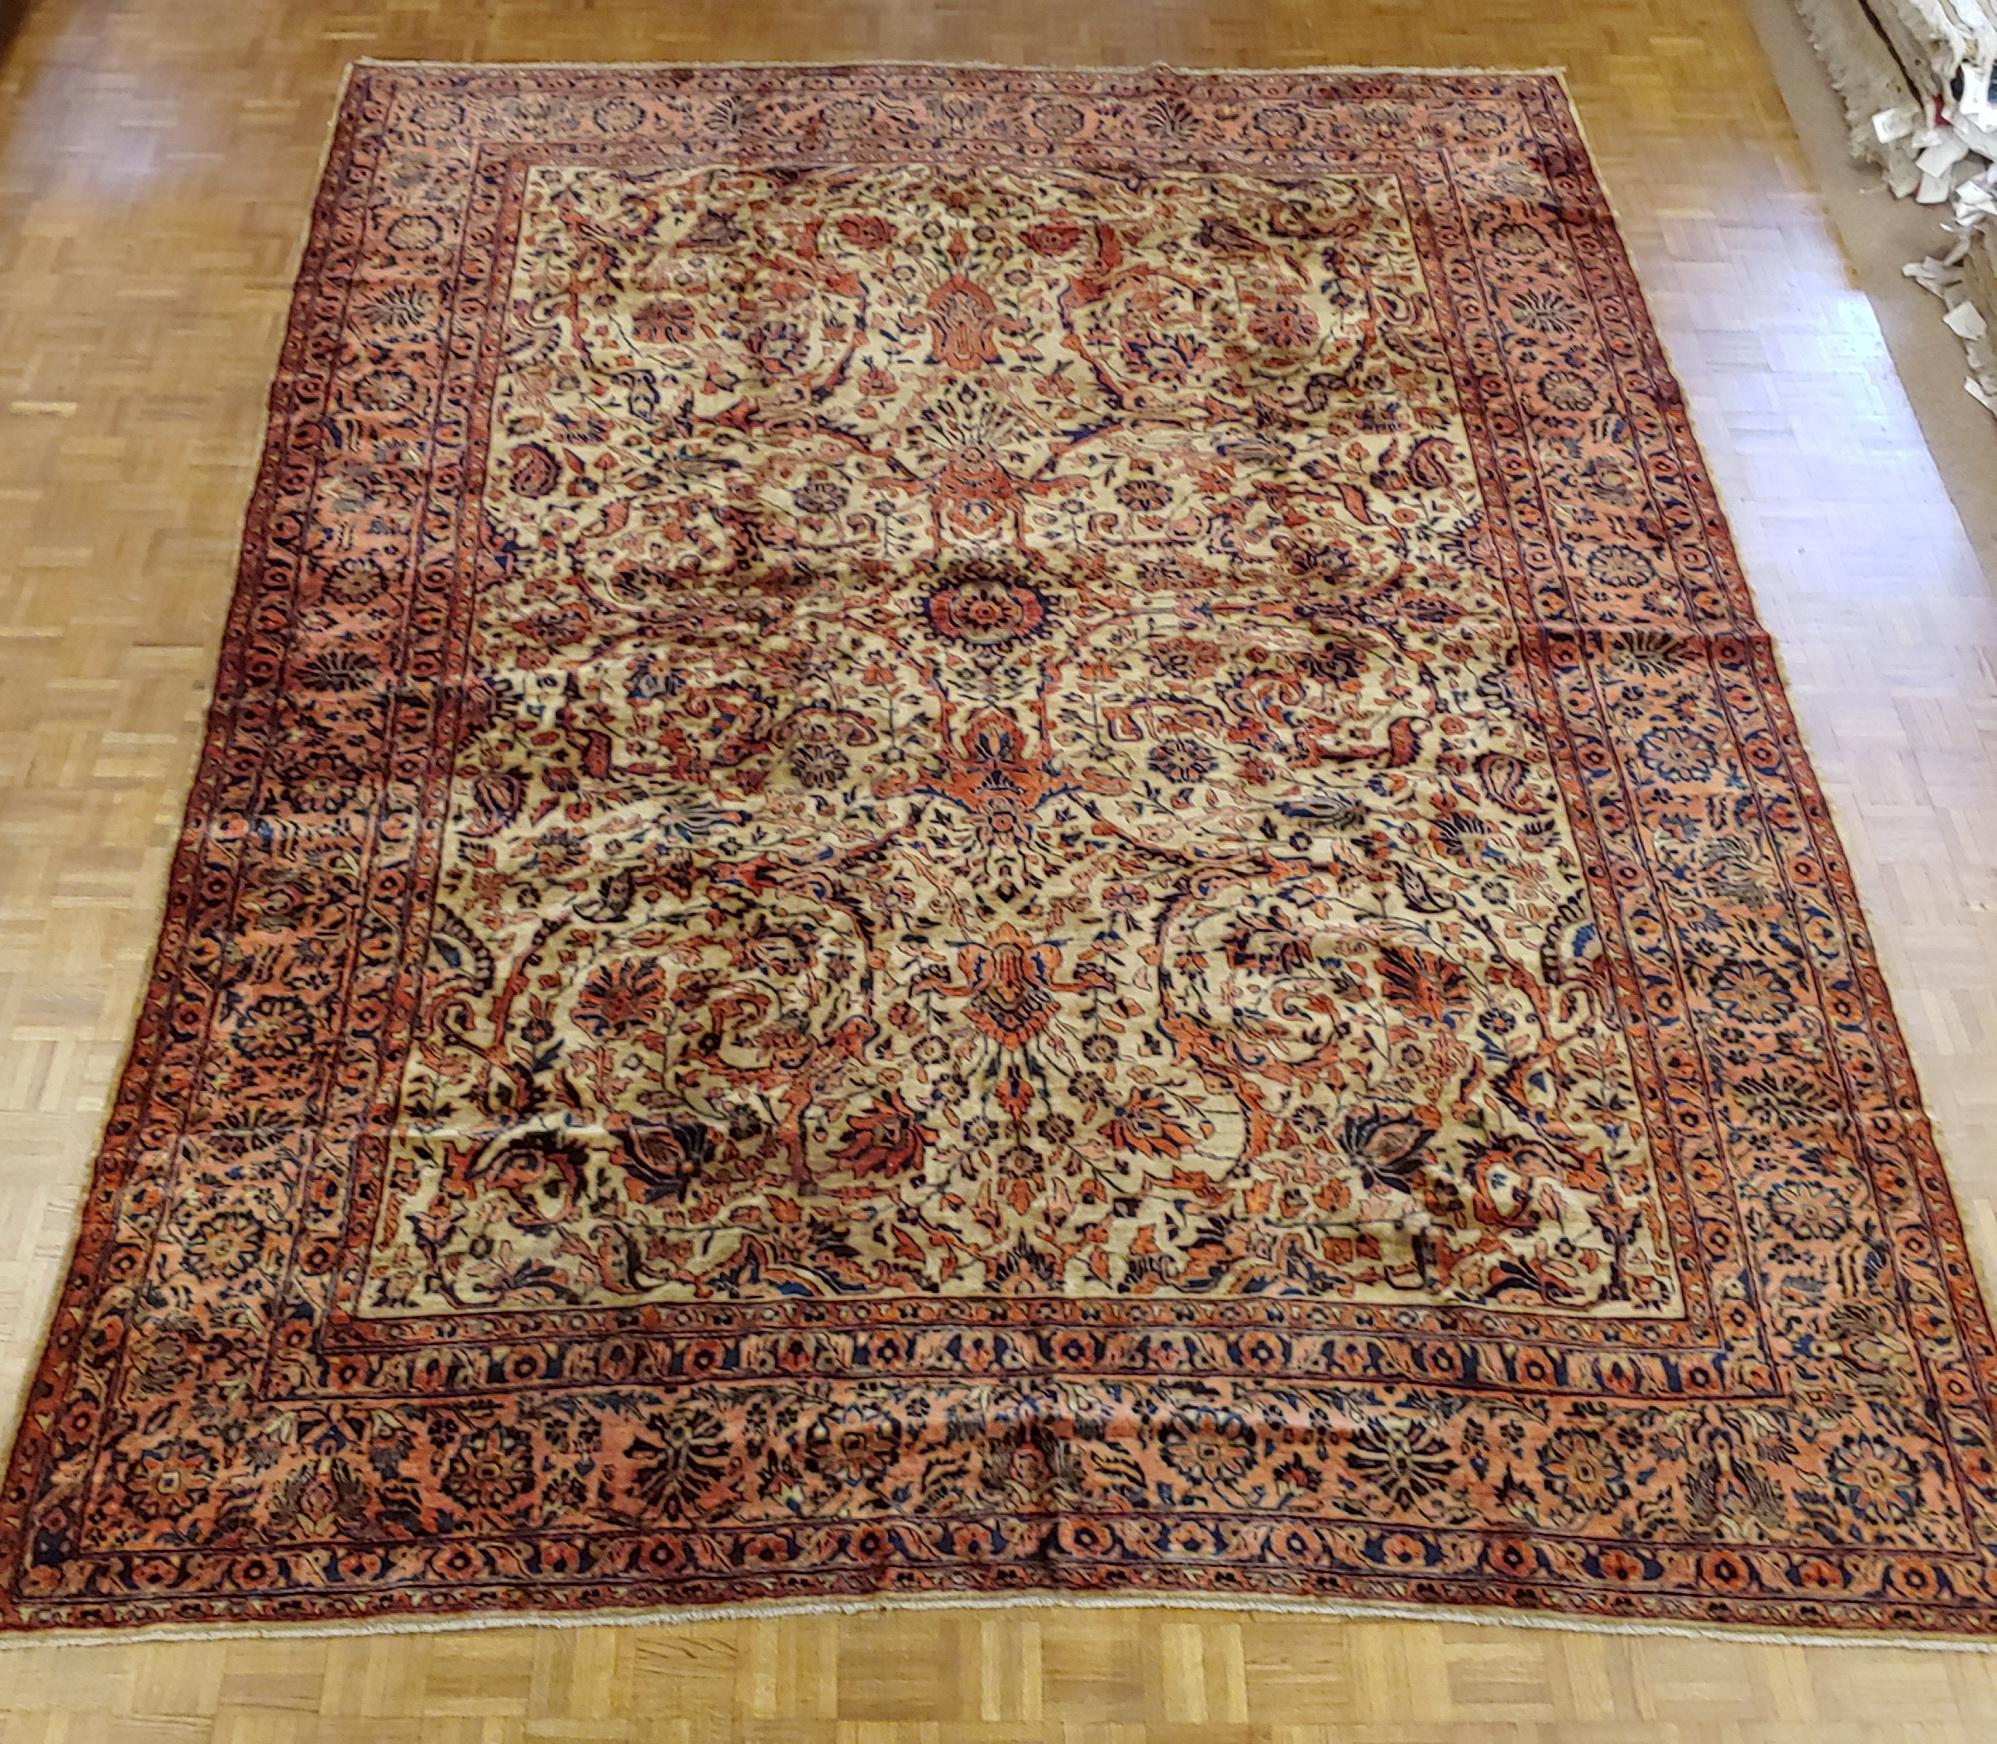 This is a wonderful and luxurious antique Persian Sarouk with a rare light gold field decorated with a detached floral motive in blues and reds is encased in a impressive salmon colored floral border. The wool feels like silk. It is 8-9 x 11-5 and